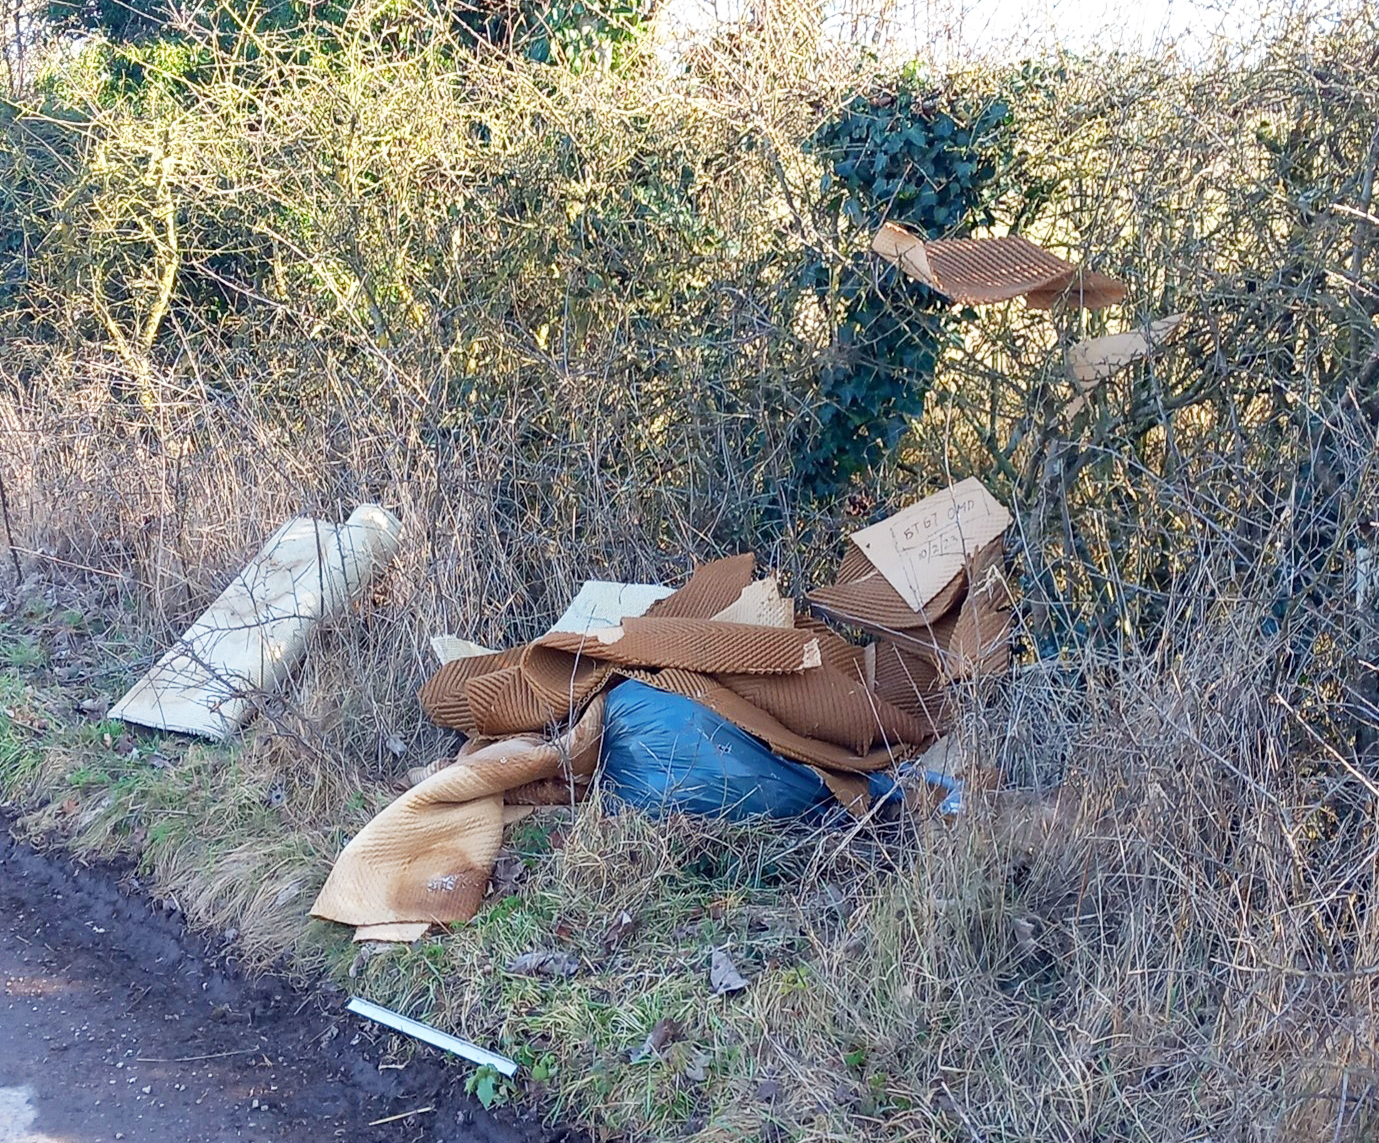 Fly-tipping in Durrington. Picture: Wiltshire Council